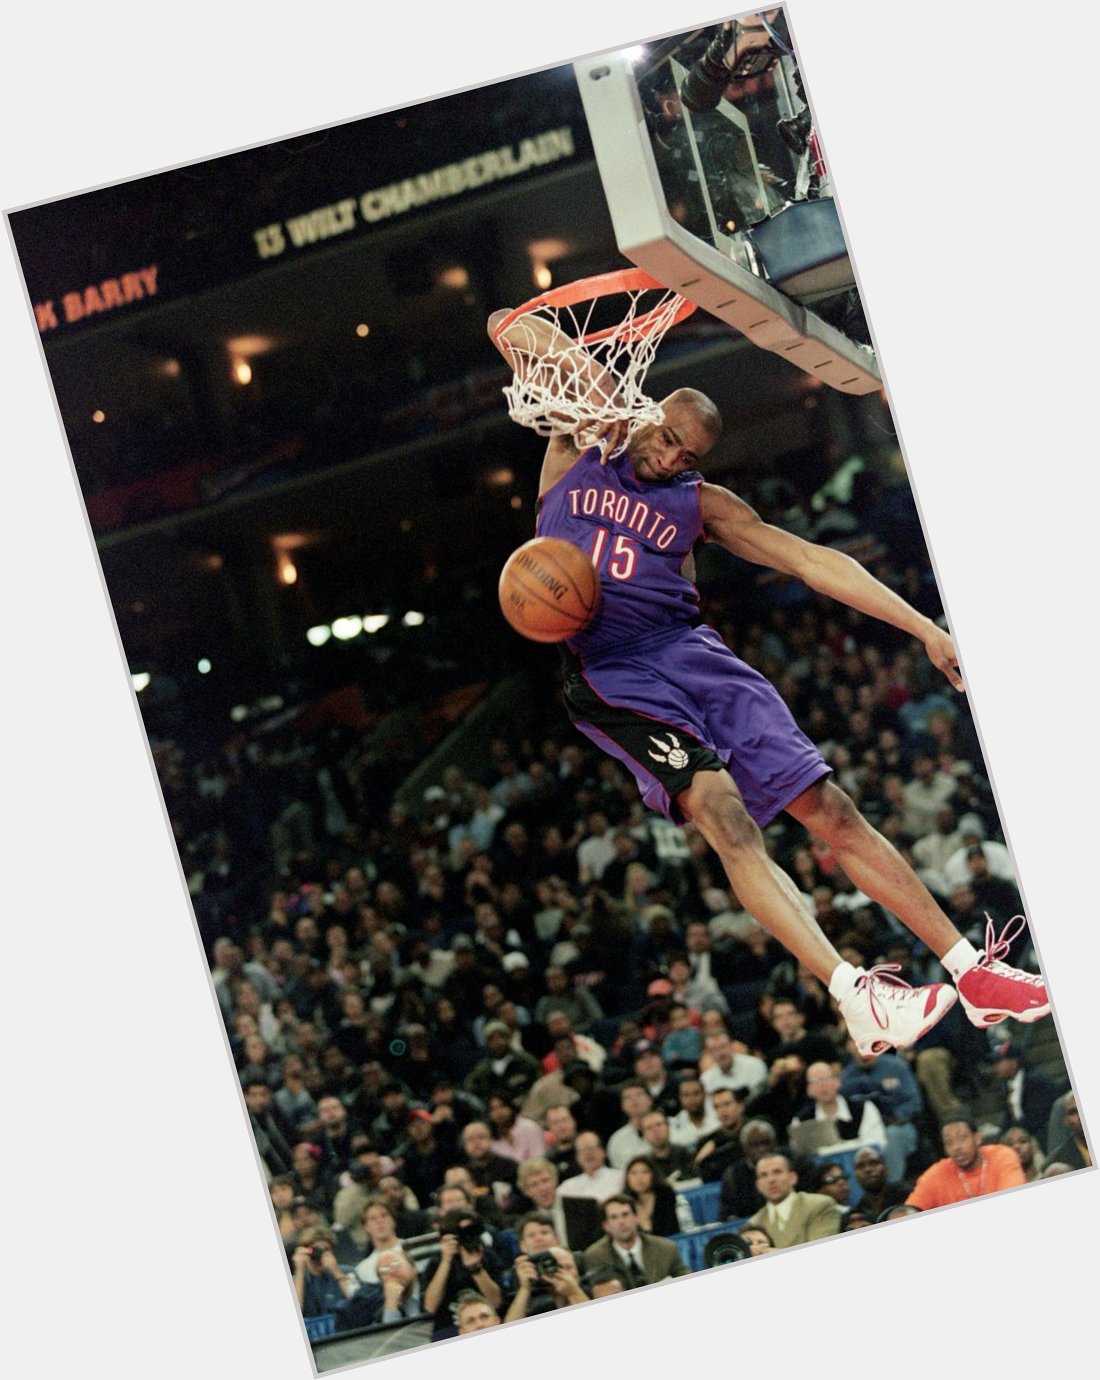 Happy birthday to dunk legend Vince Carter 